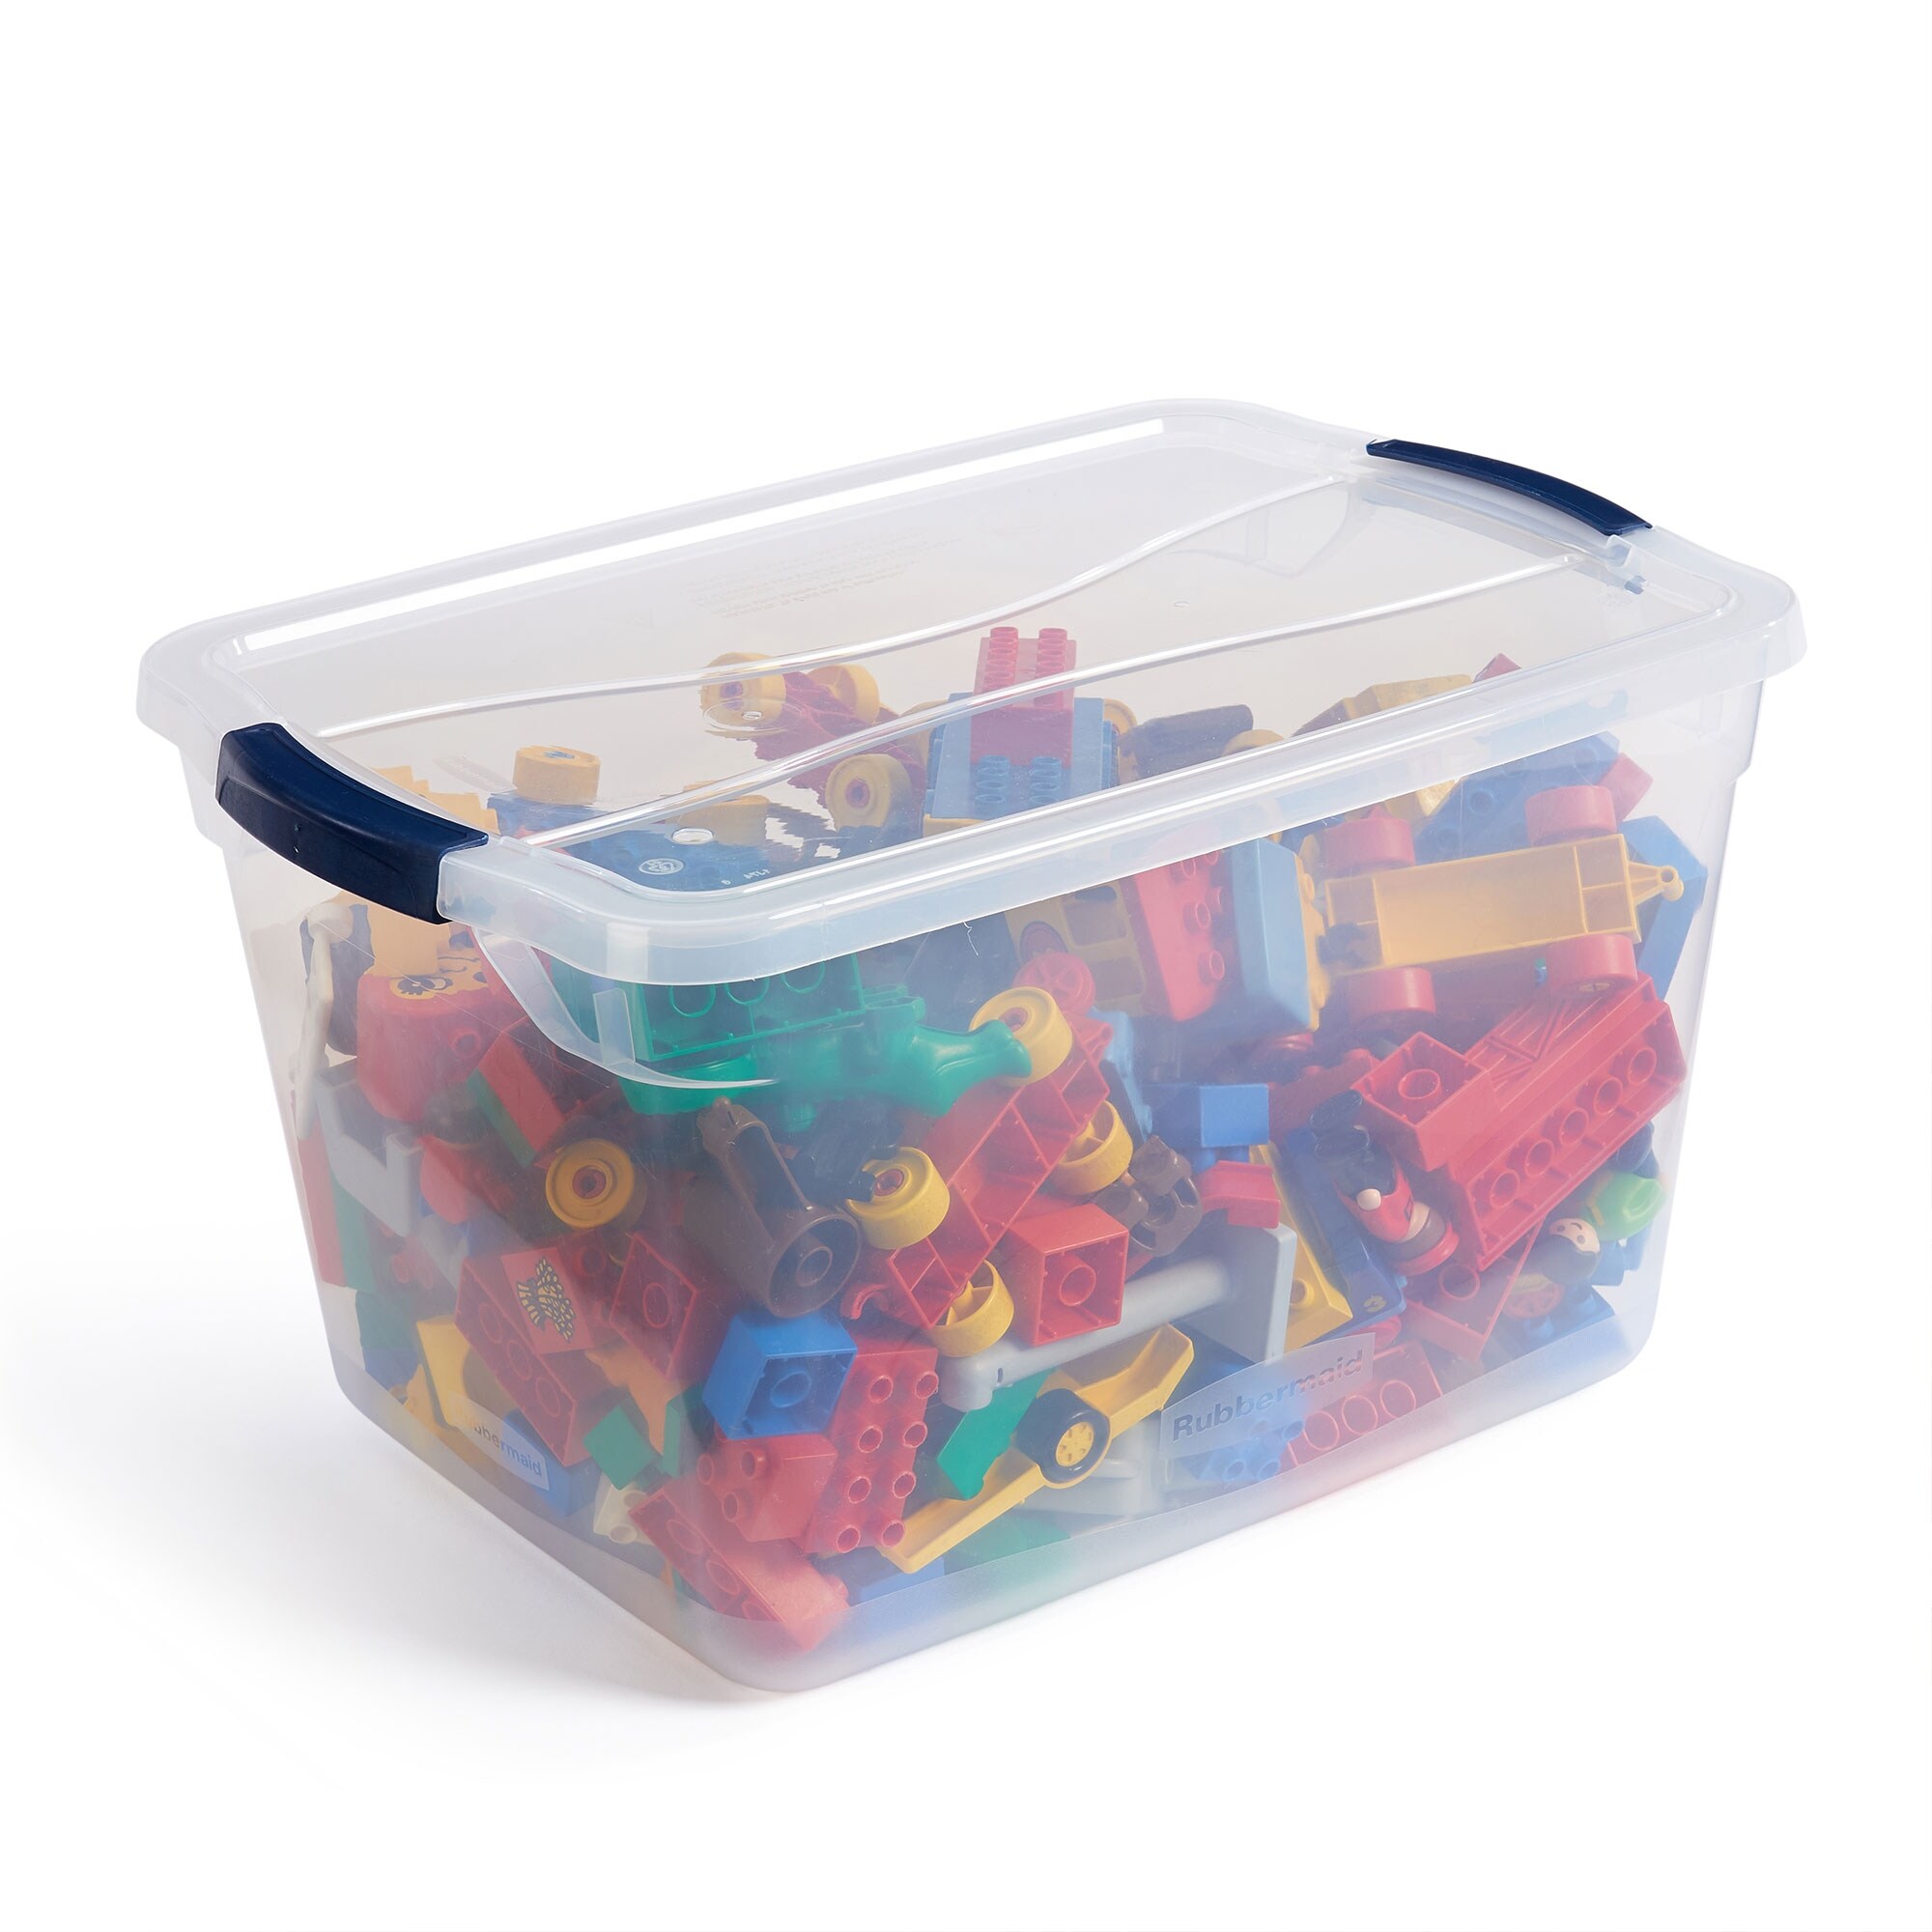 https://ak1.ostkcdn.com/images/products/is/images/direct/d080752703ef666687790163adc3e39dca605726/Rubbermaid-Cleverstore-30-Quart-Plastic-Storage-Tote-Container-with-Lid-%286-Pack%29.jpg